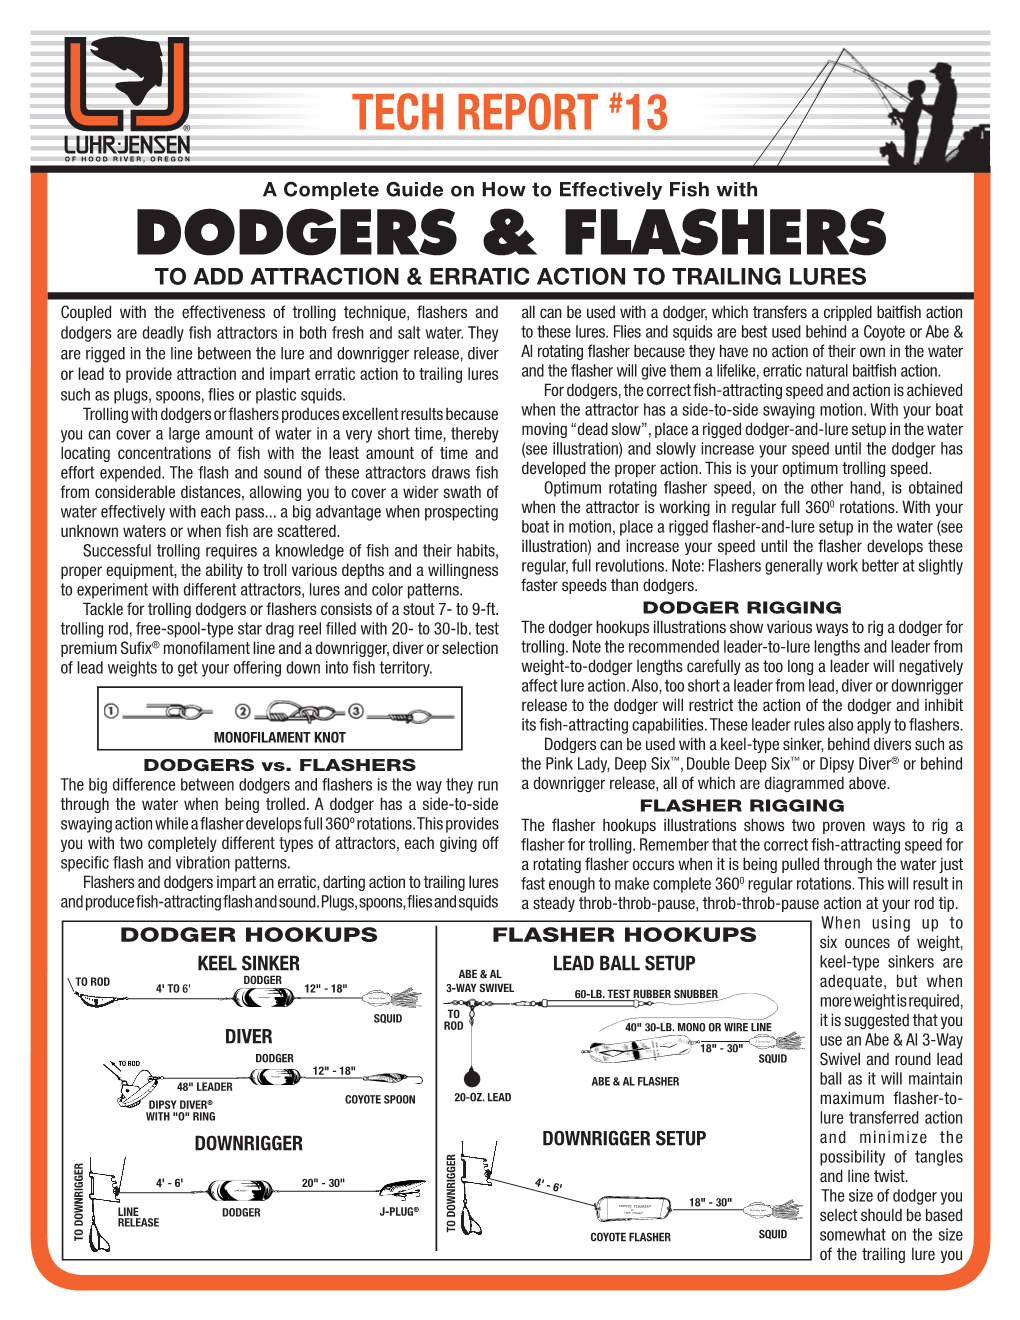 Tech Report #13, Dodgers & Flashers